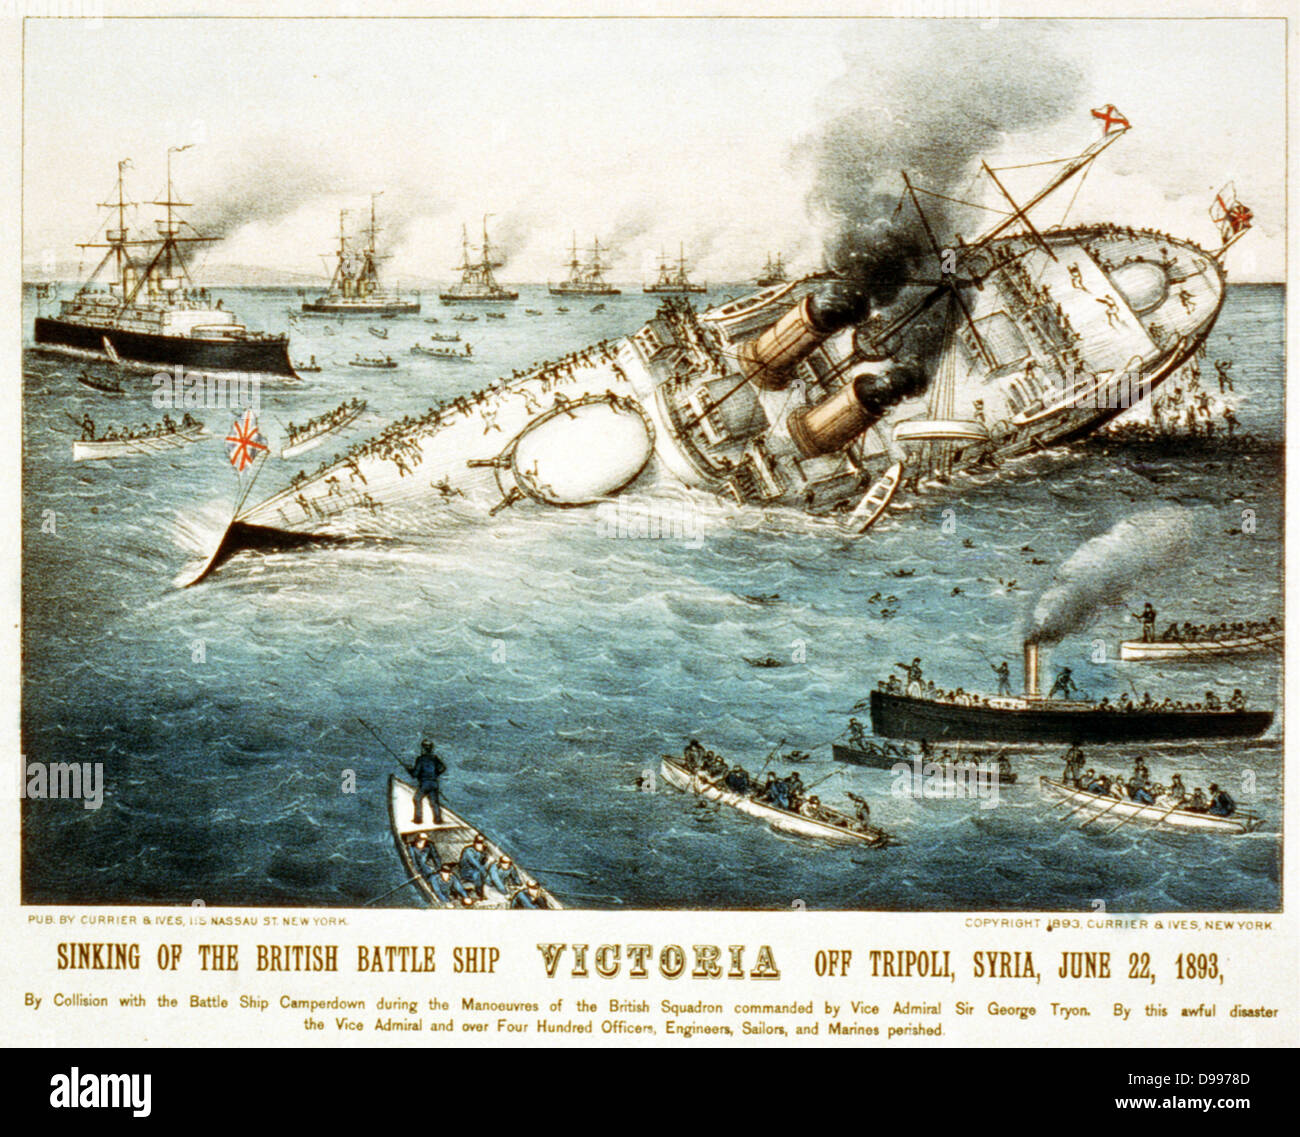 Sinking of the British battle ship Victoria off Tripoli, Syria, June 22, 1893. Currier & Ives lithograph, hand-collared. c1893. Stock Photo